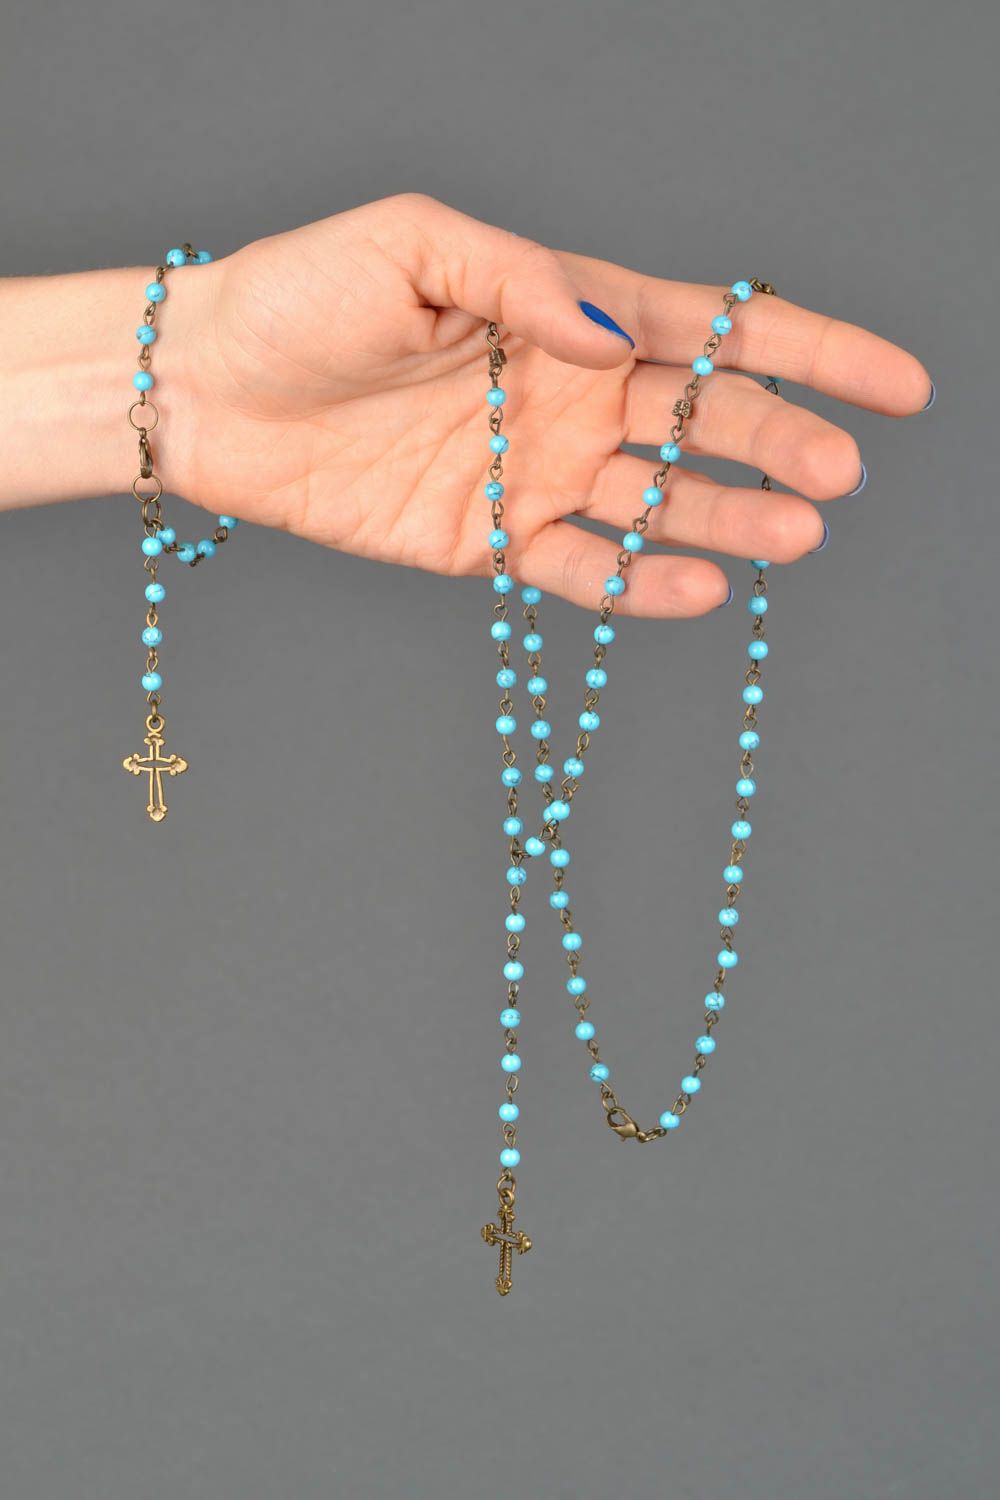 Turquoise rosary necklace and bracelet photo 1